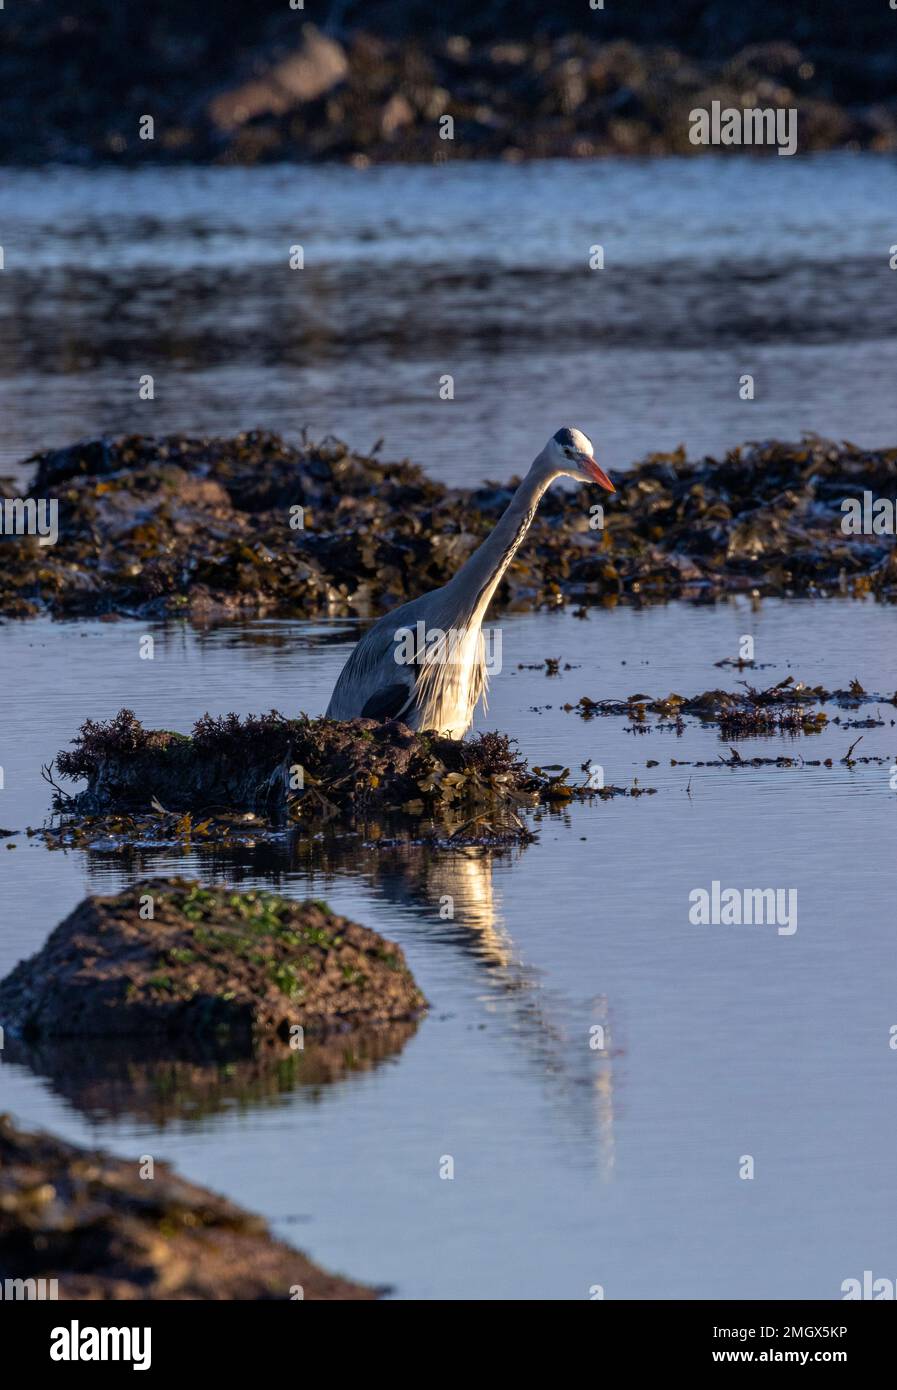 A Grey Heron stands as still as a statue as it waits for fish to swim close enough for its lightening quick strike. Stock Photo